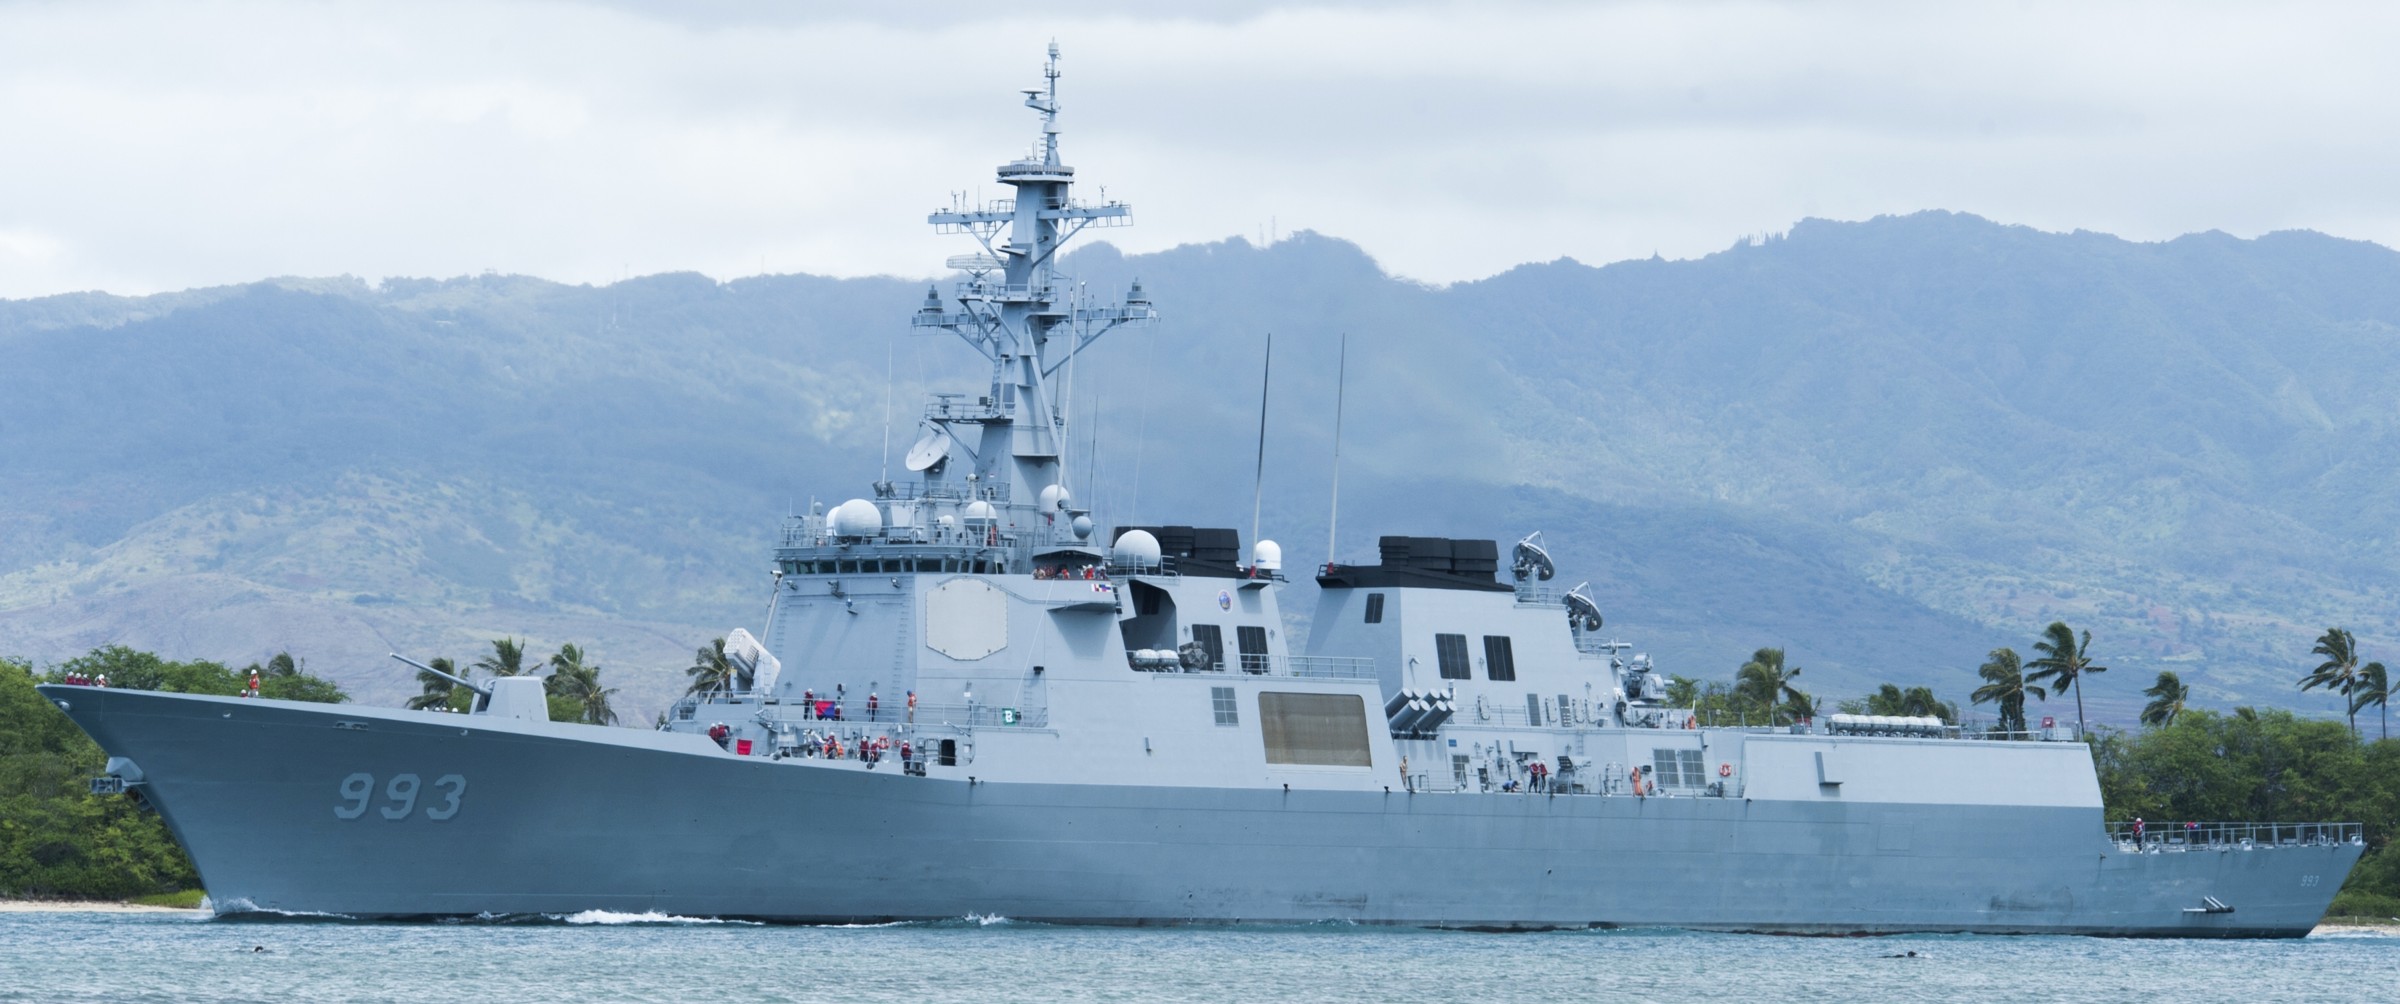 ddg-993 roks seoae ryu seong-ryong sejong the great class guided missile destroyer aegis republic of korea navy rokn 18